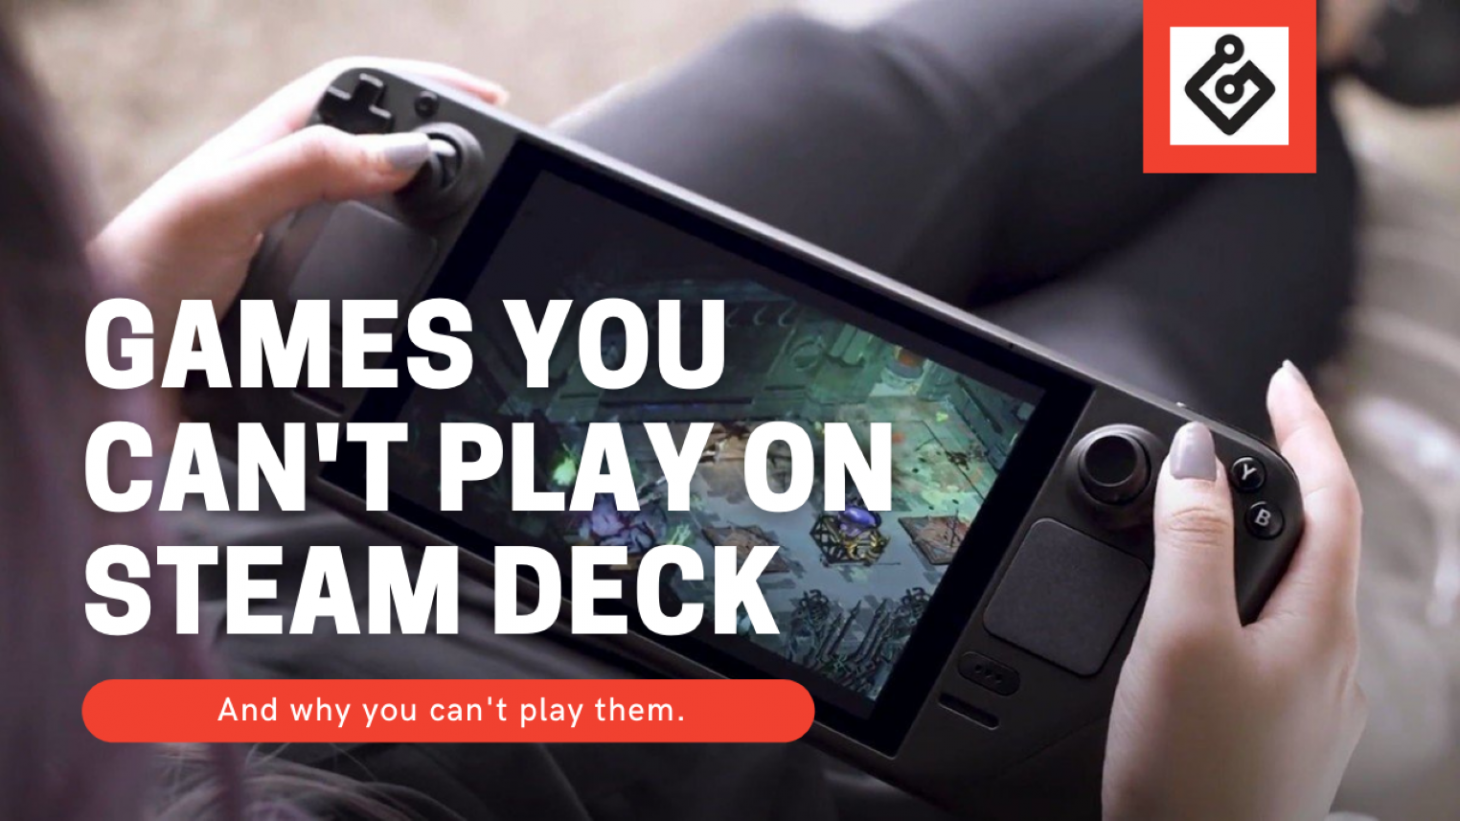 Here Are The List Of Games You Can't Play On Steam Deck - Game